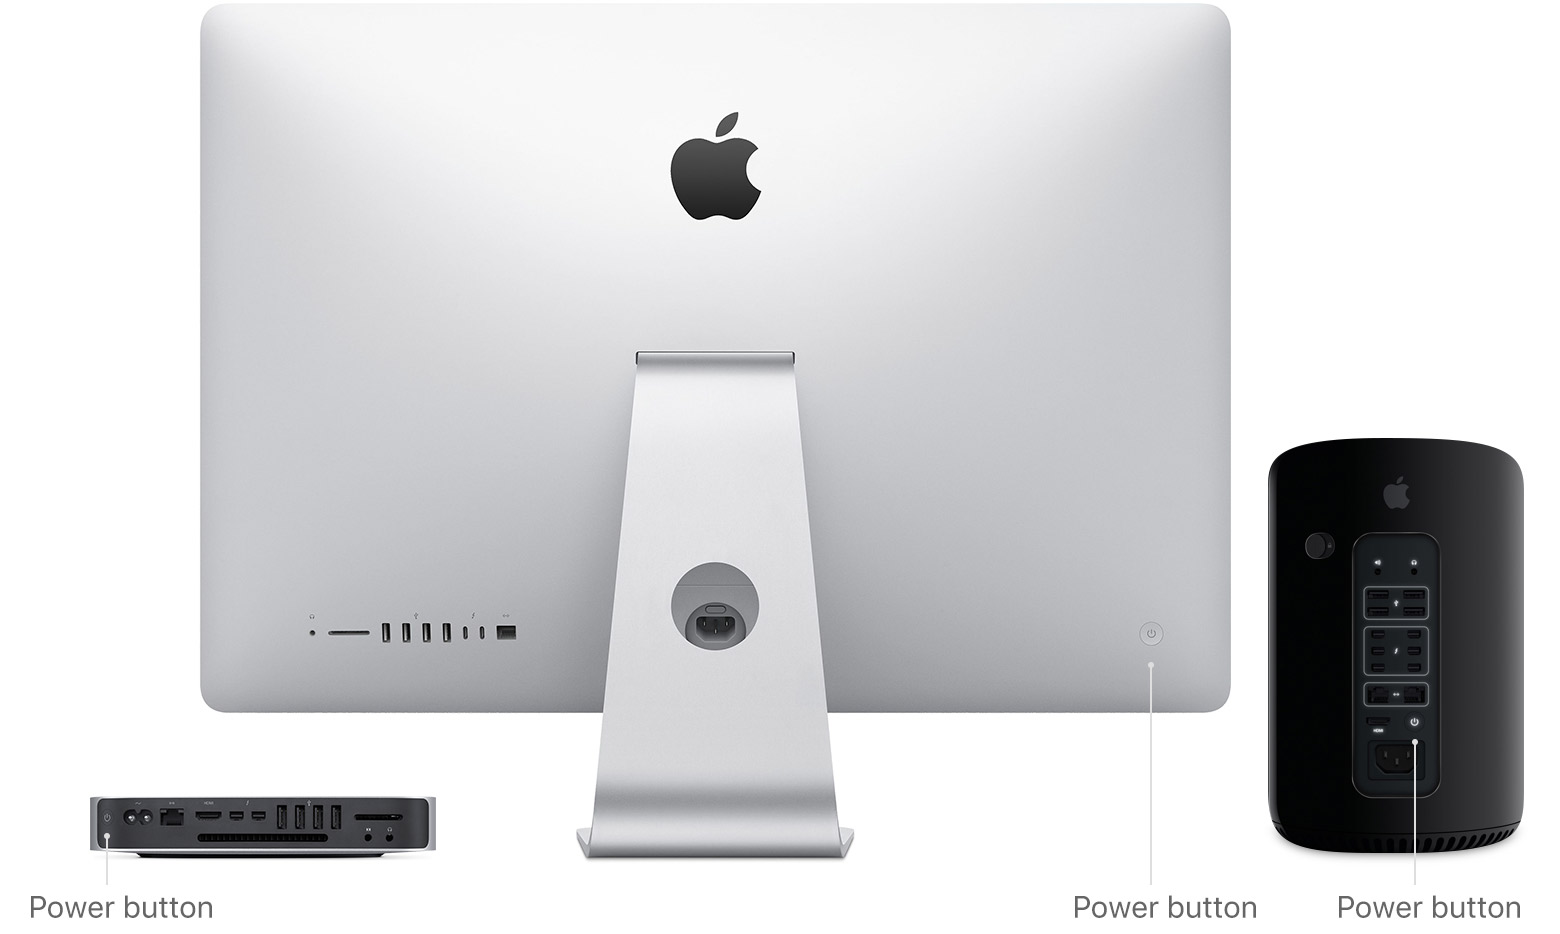 how to reset imac without password